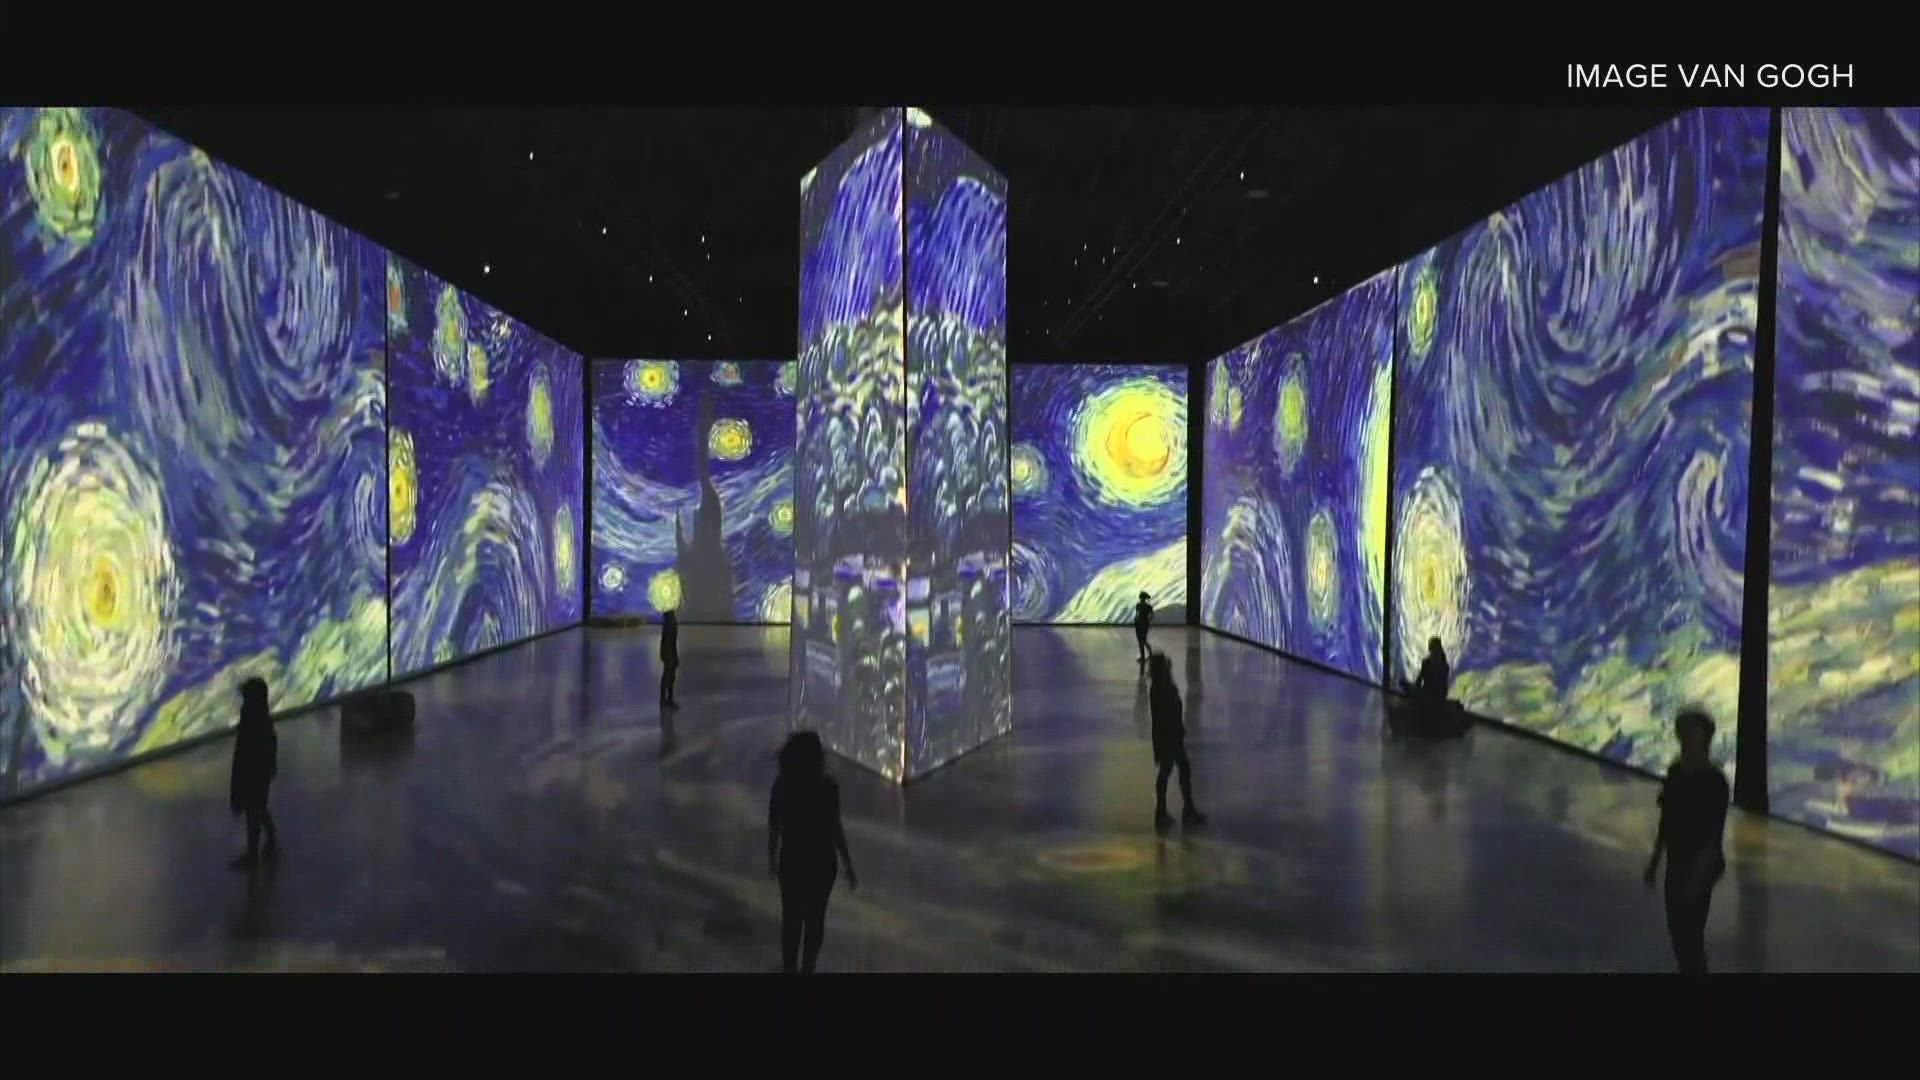 Annabelle Mauger is the creator of Imagine Van Gogh, an immersive art exhibit featuring more than 200 of Van Gogh's paintings.